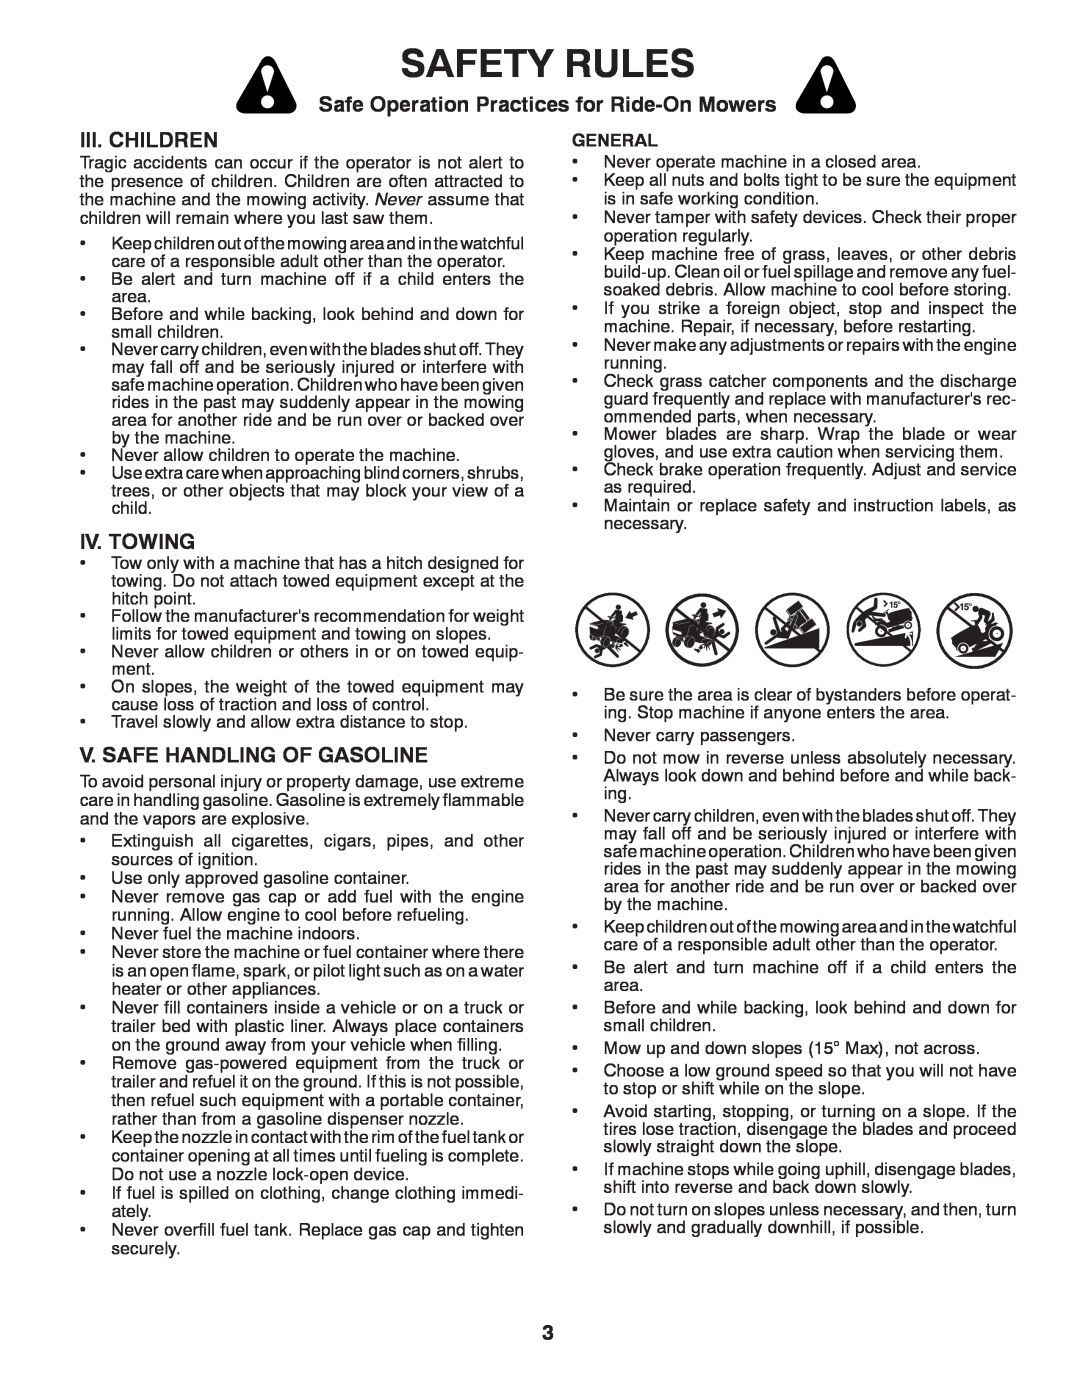 Husqvarna LTH1438 owner manual Safety Rules, Safe Operation Practices for Ride-OnMowers, Iii. Children, Iv. Towing, General 